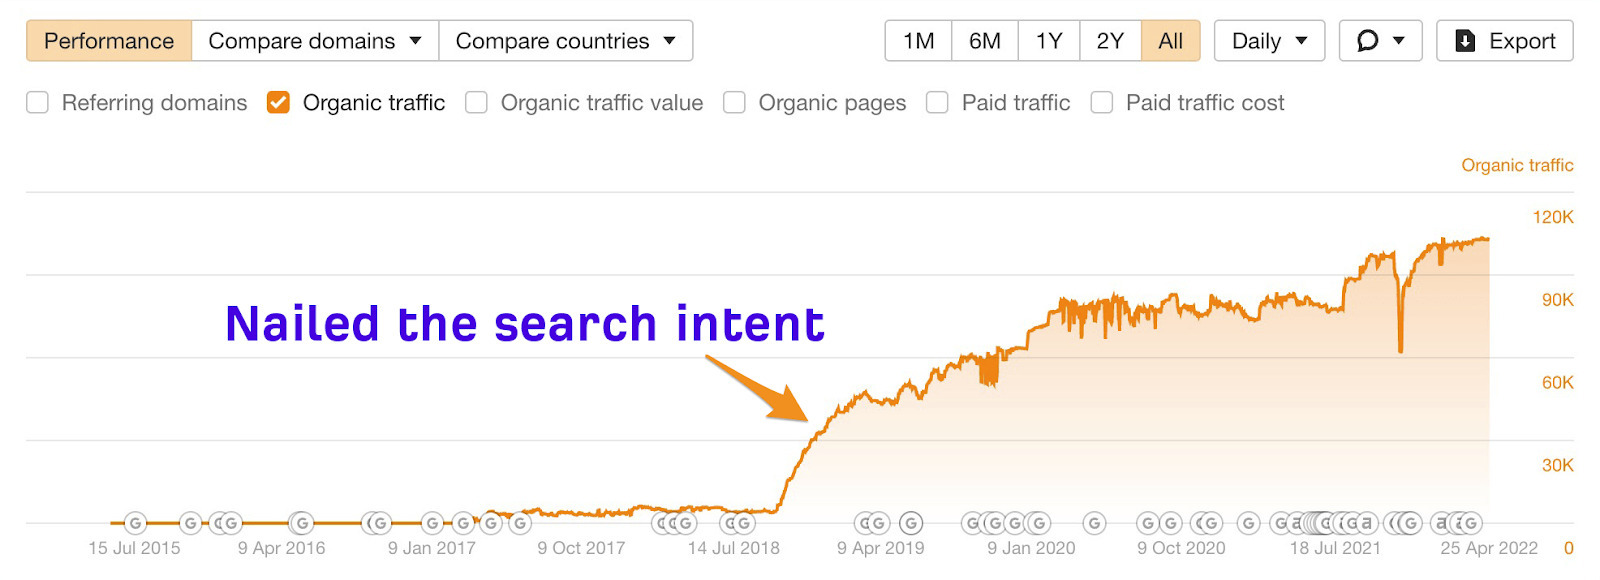 Nailed search intent (before and after results shown in line graph)